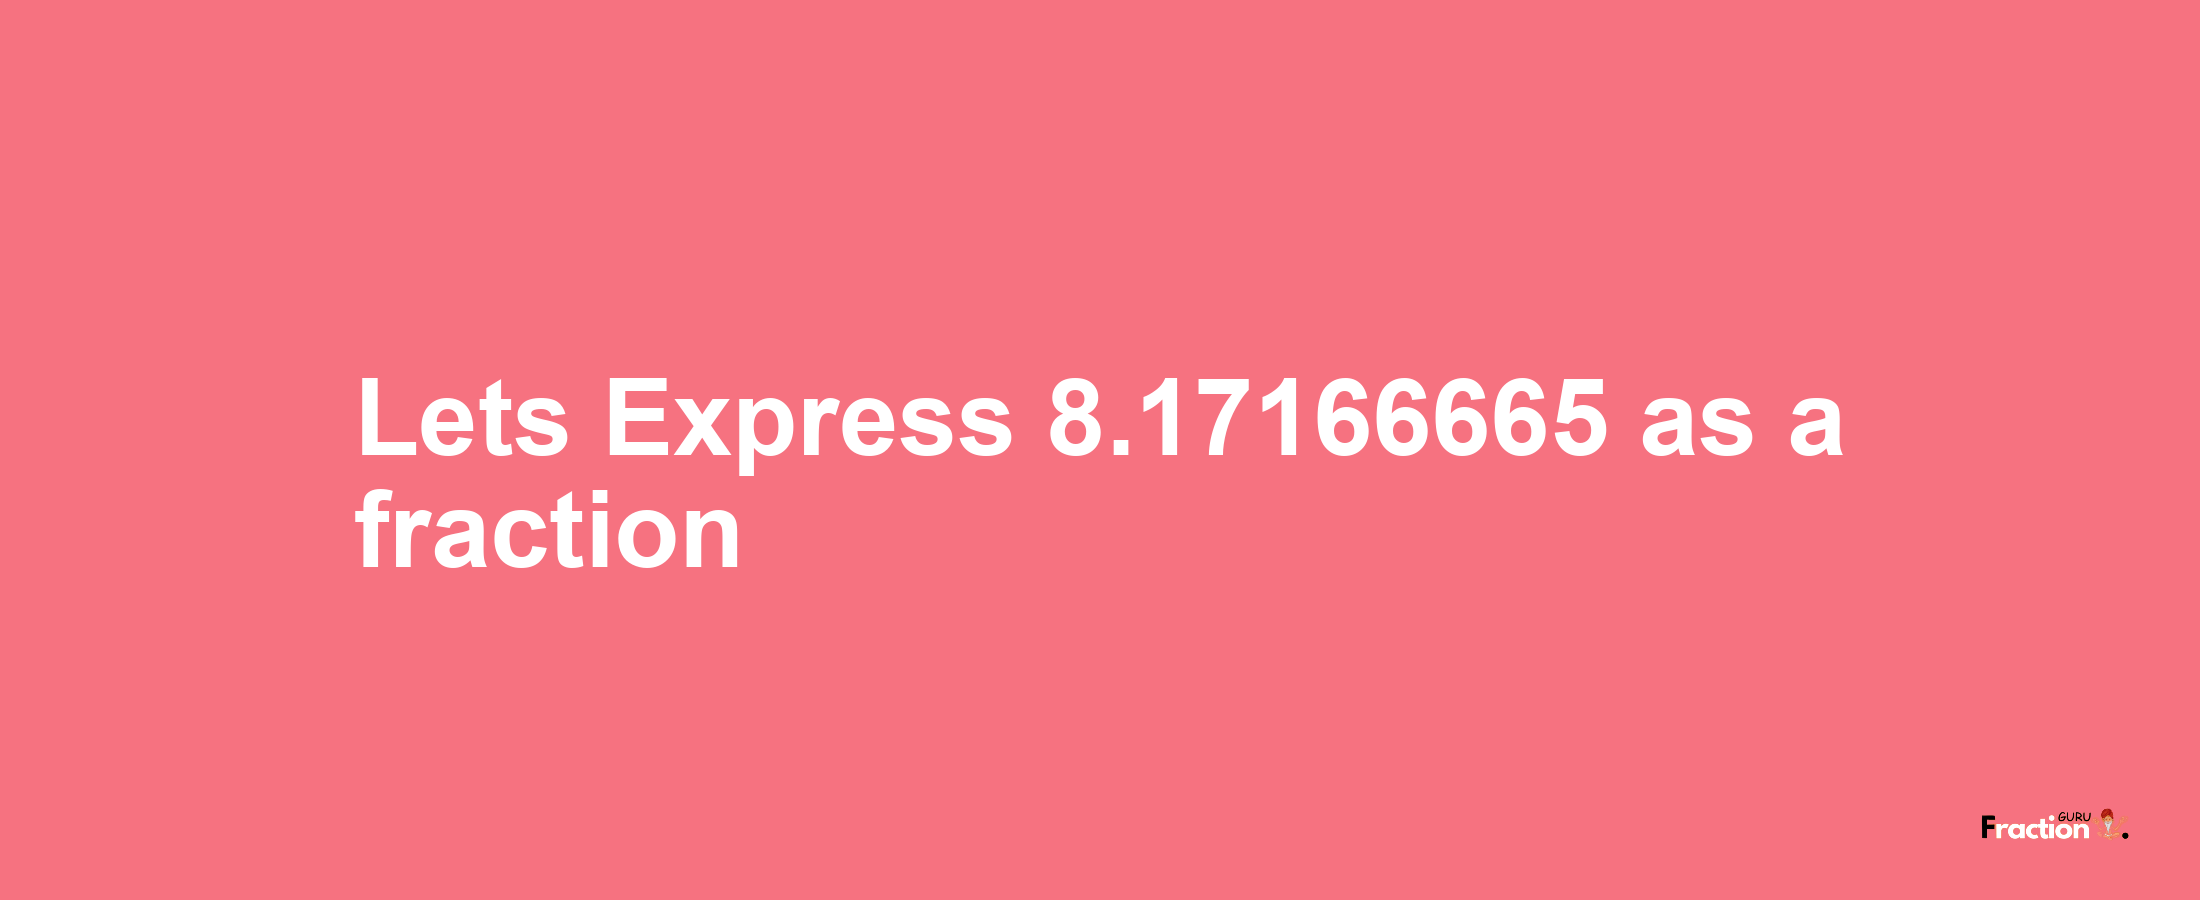 Lets Express 8.17166665 as afraction